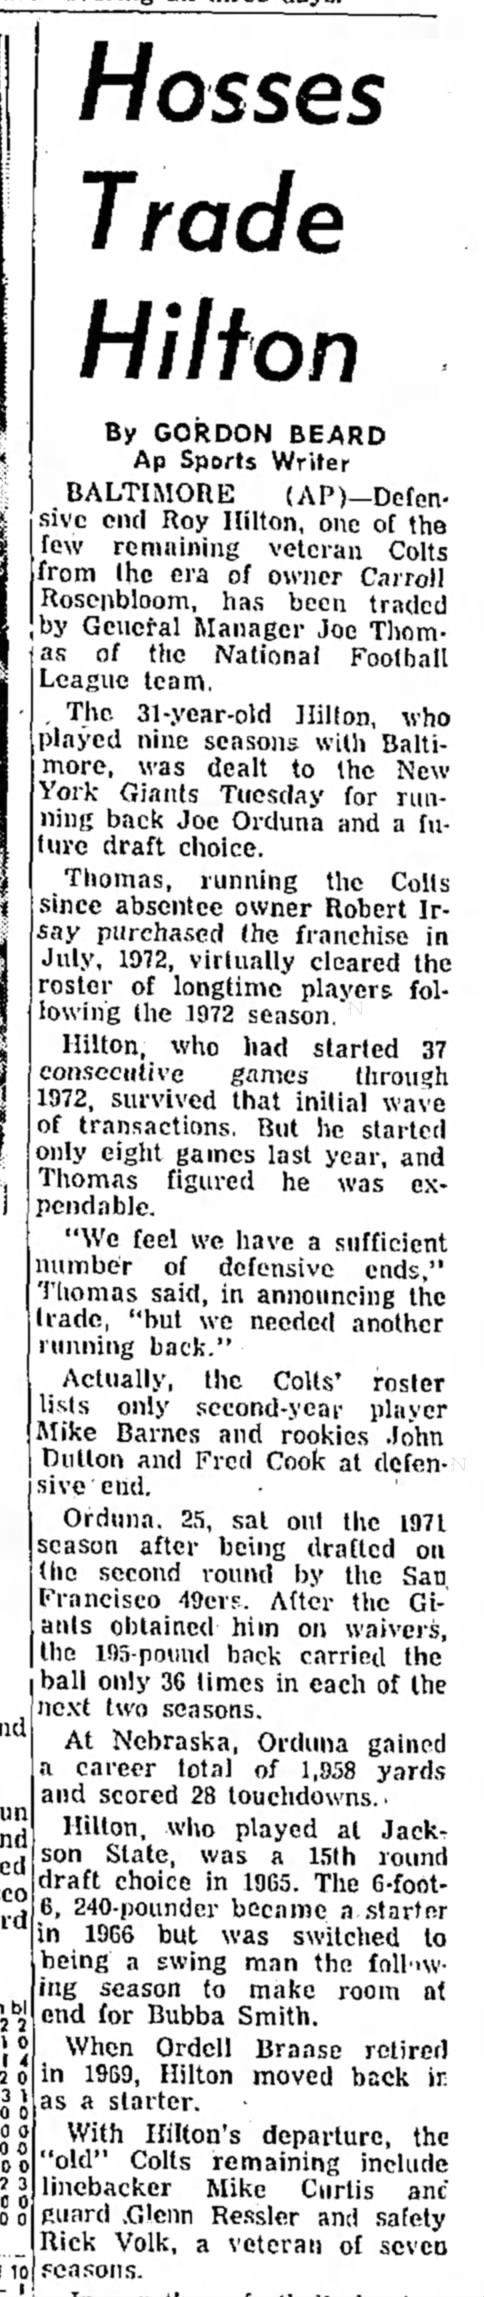 Hosses Trade Defensive End Roy Hilton to the New York Giants